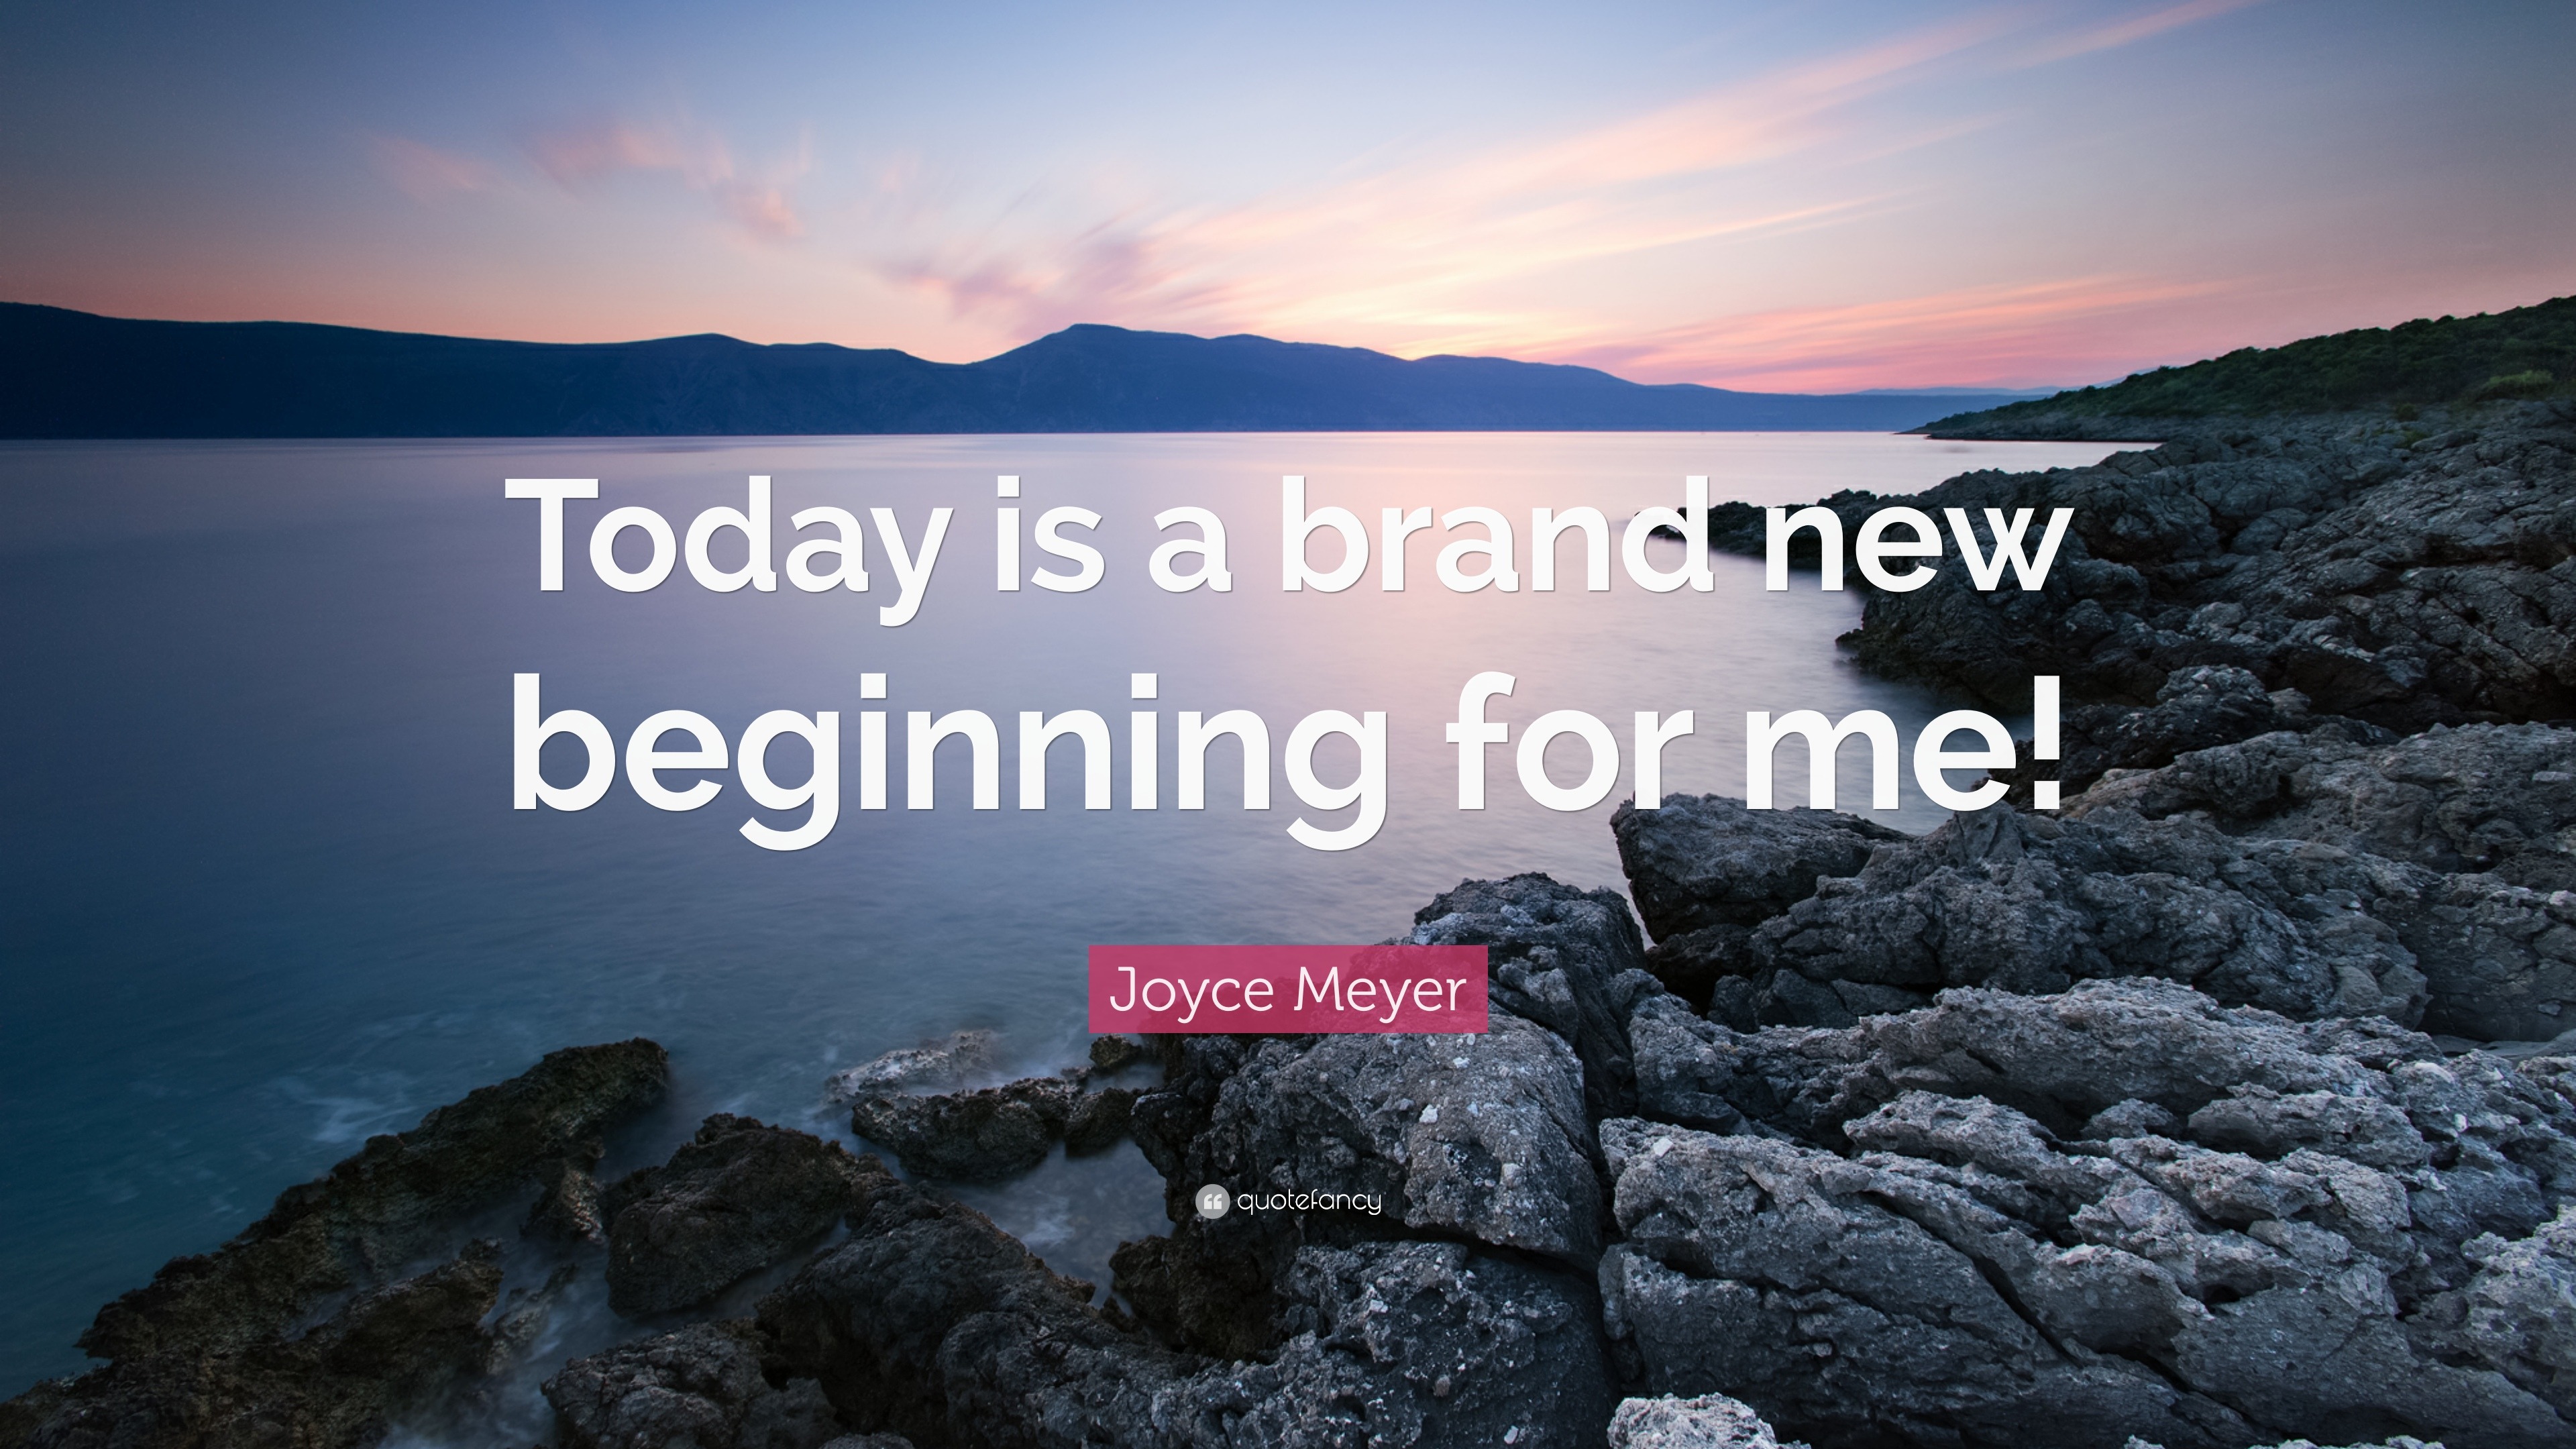 Joyce Meyer Quote “Today is a brand new beginning for me ”